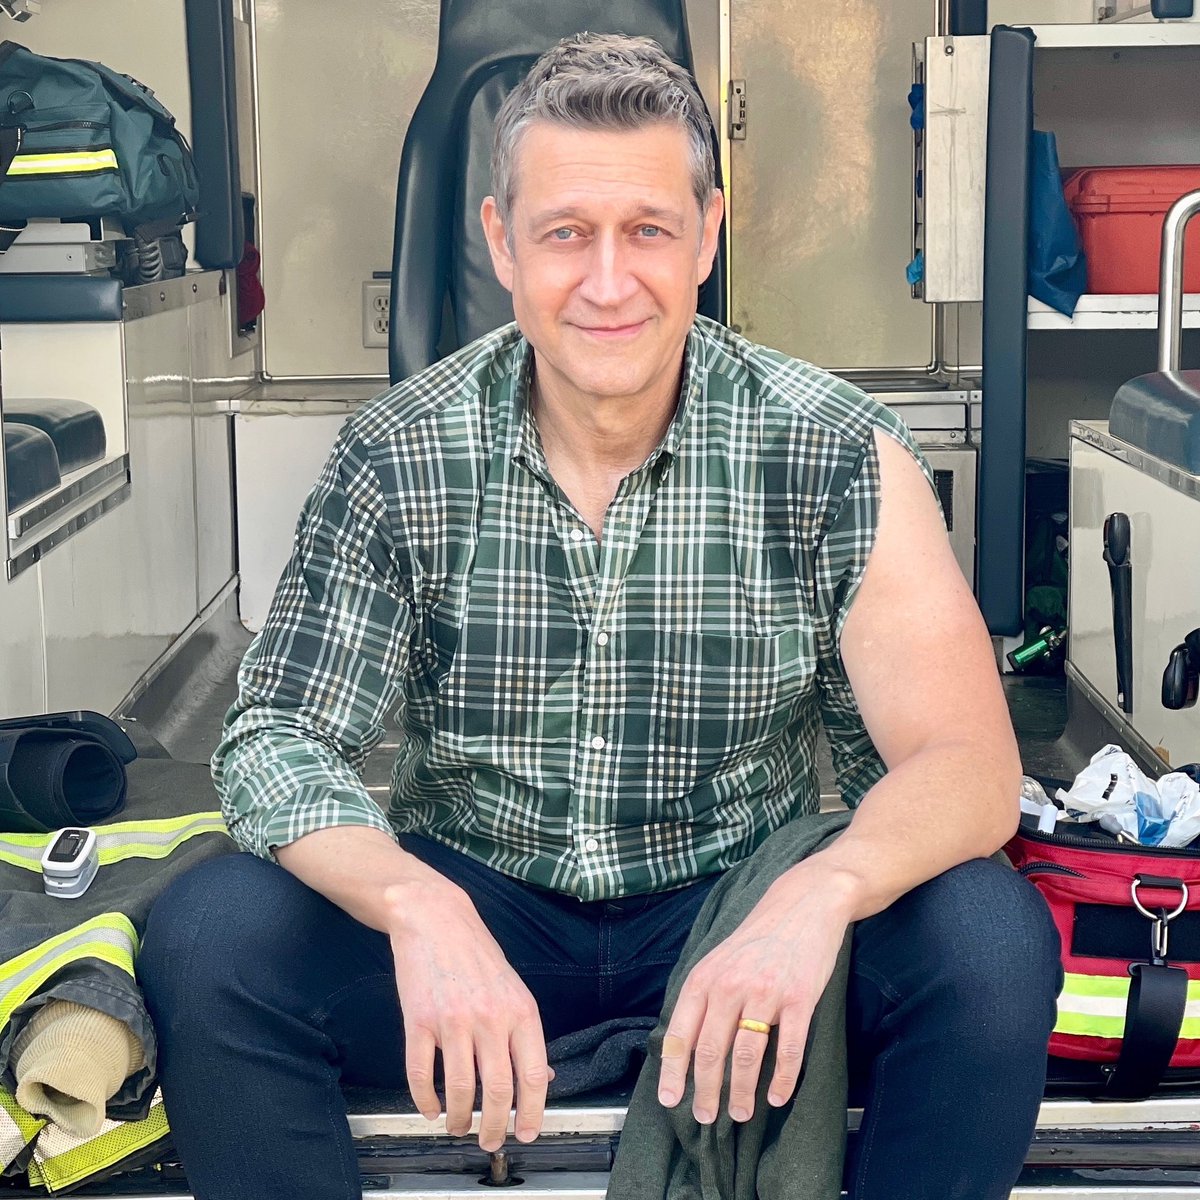 So I somehow ended up in this emergency vehicle with my shirt ripped. See how it happened tonight on @Station19! Had a wonderful time playing with everyone on the show. A terrific bunch of folks! #ActorsLife #Station19